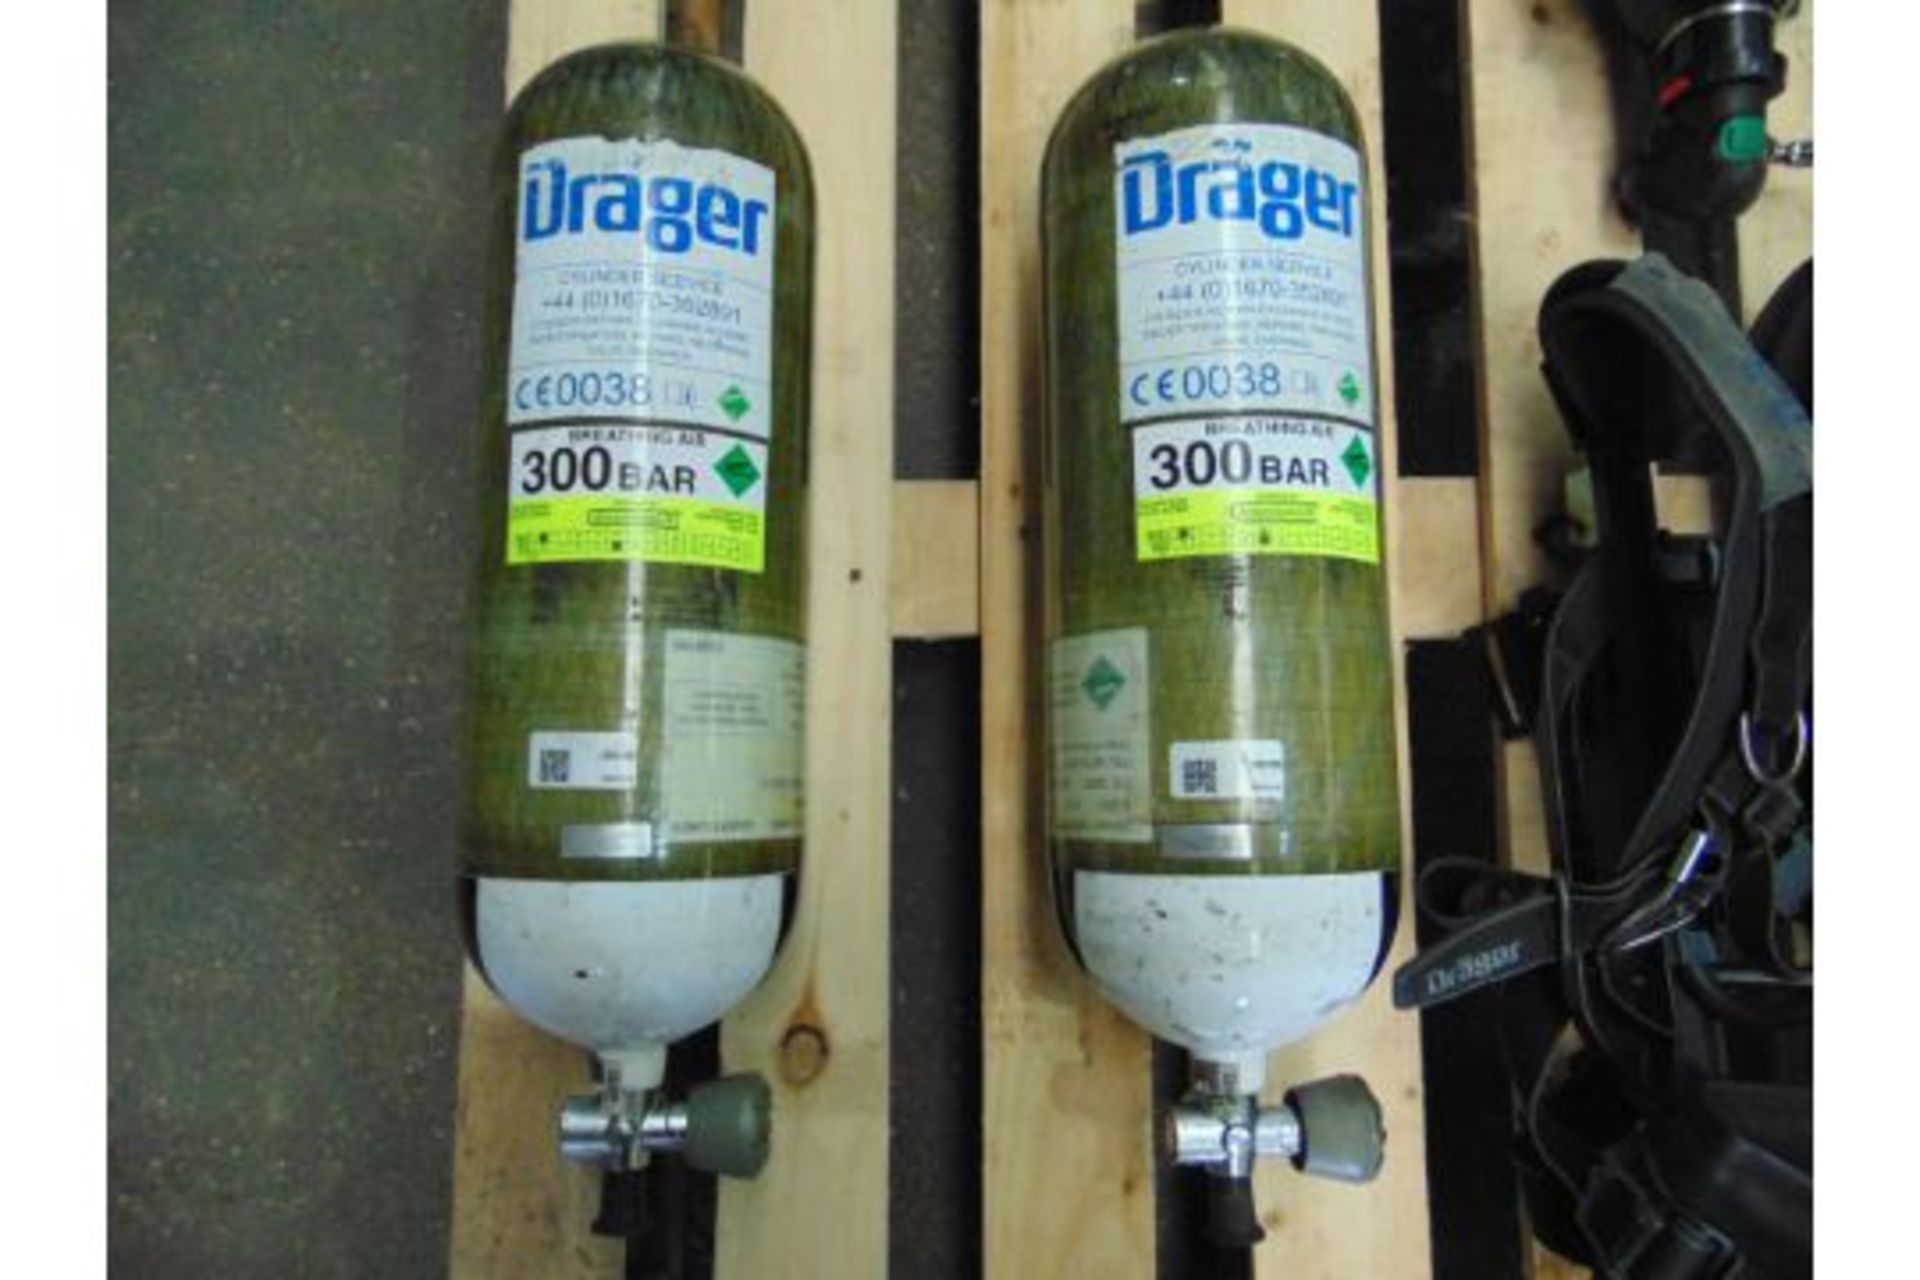 Drager PSS 7000 Self Contained Breathing Apparatus w/ 2 x Drager 300 Bar Air Cylinders - Image 2 of 18